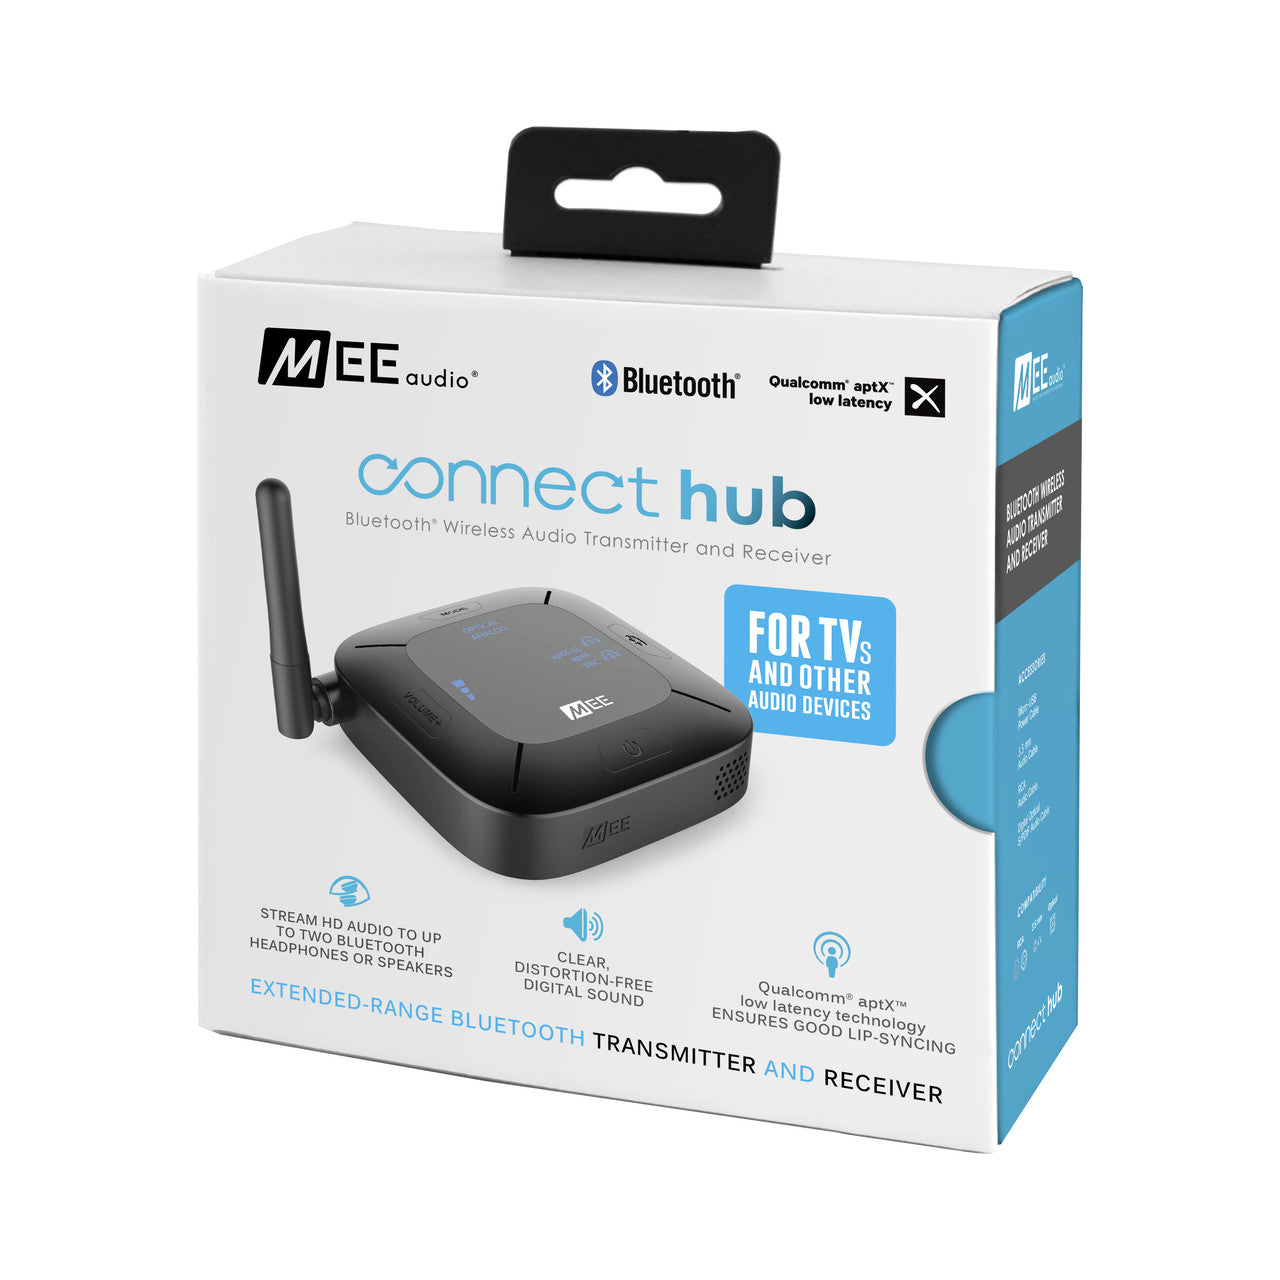 Image of Connect Hub Bluetooth Audio Transmitter & Receiver.